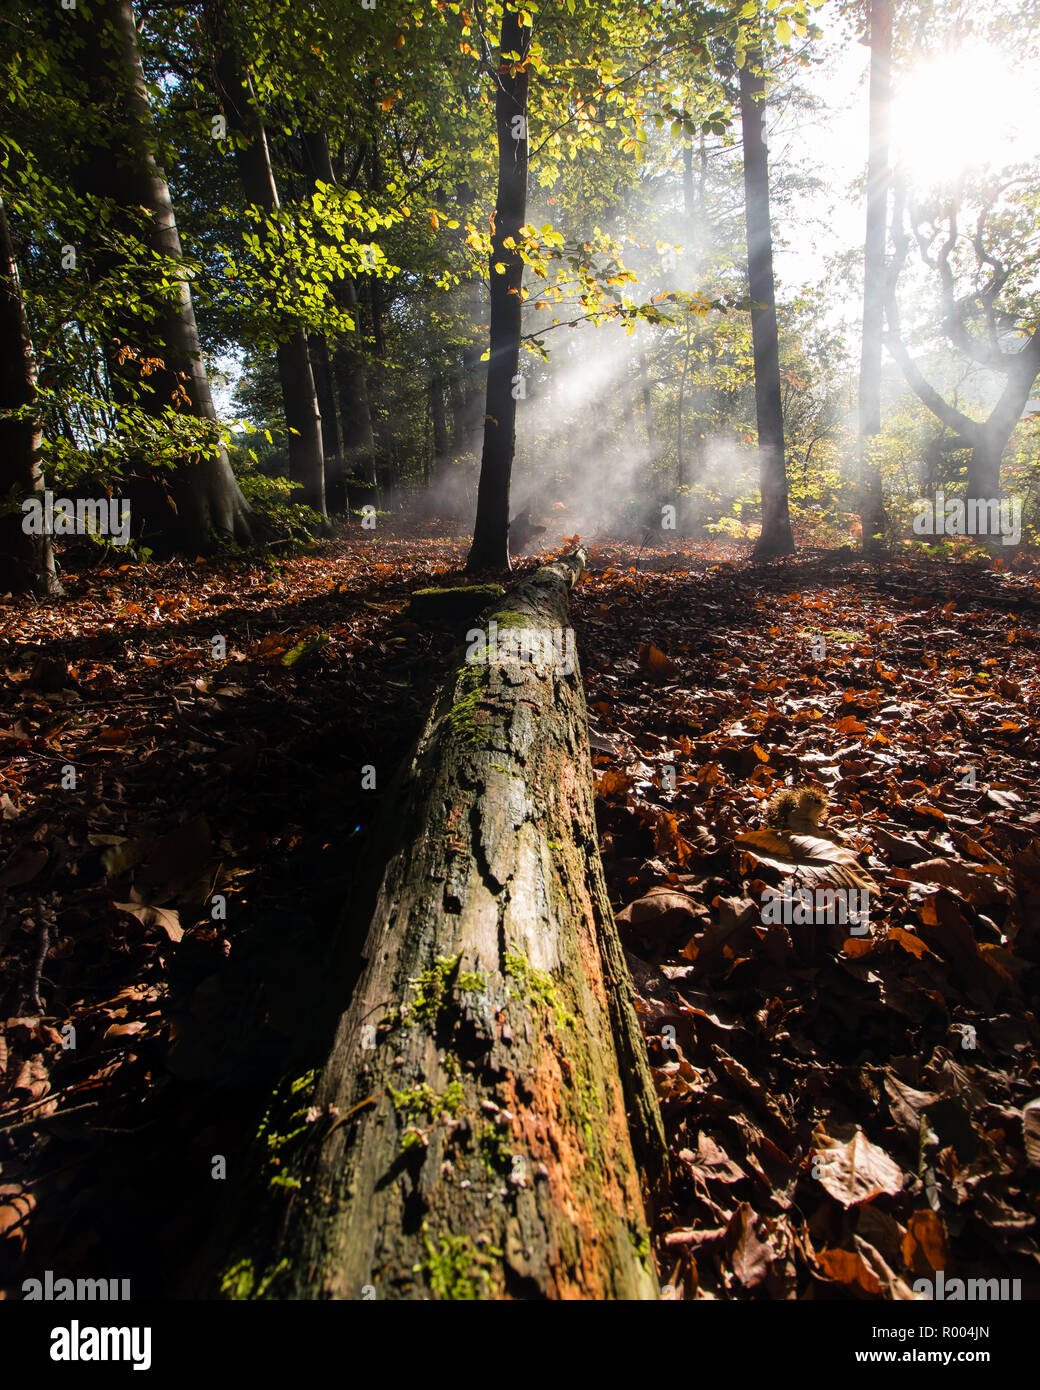 Morning sunlight shining through through trees in a forest during autumn Stock Photo